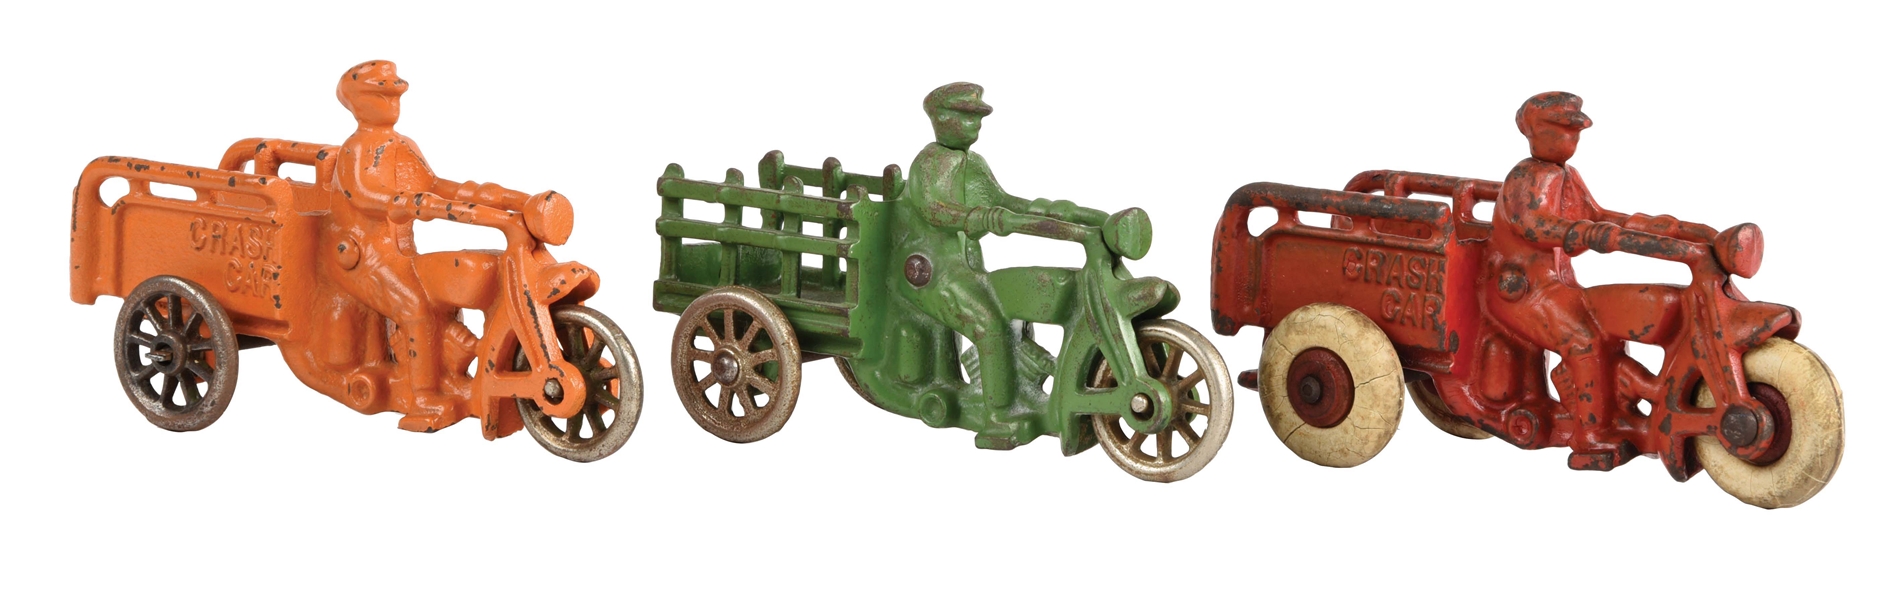 LOT OF 3: CAST-IRON HUBLEY CRASH CAR AND STAKE-BACK MOTORCYCLE TOYS.